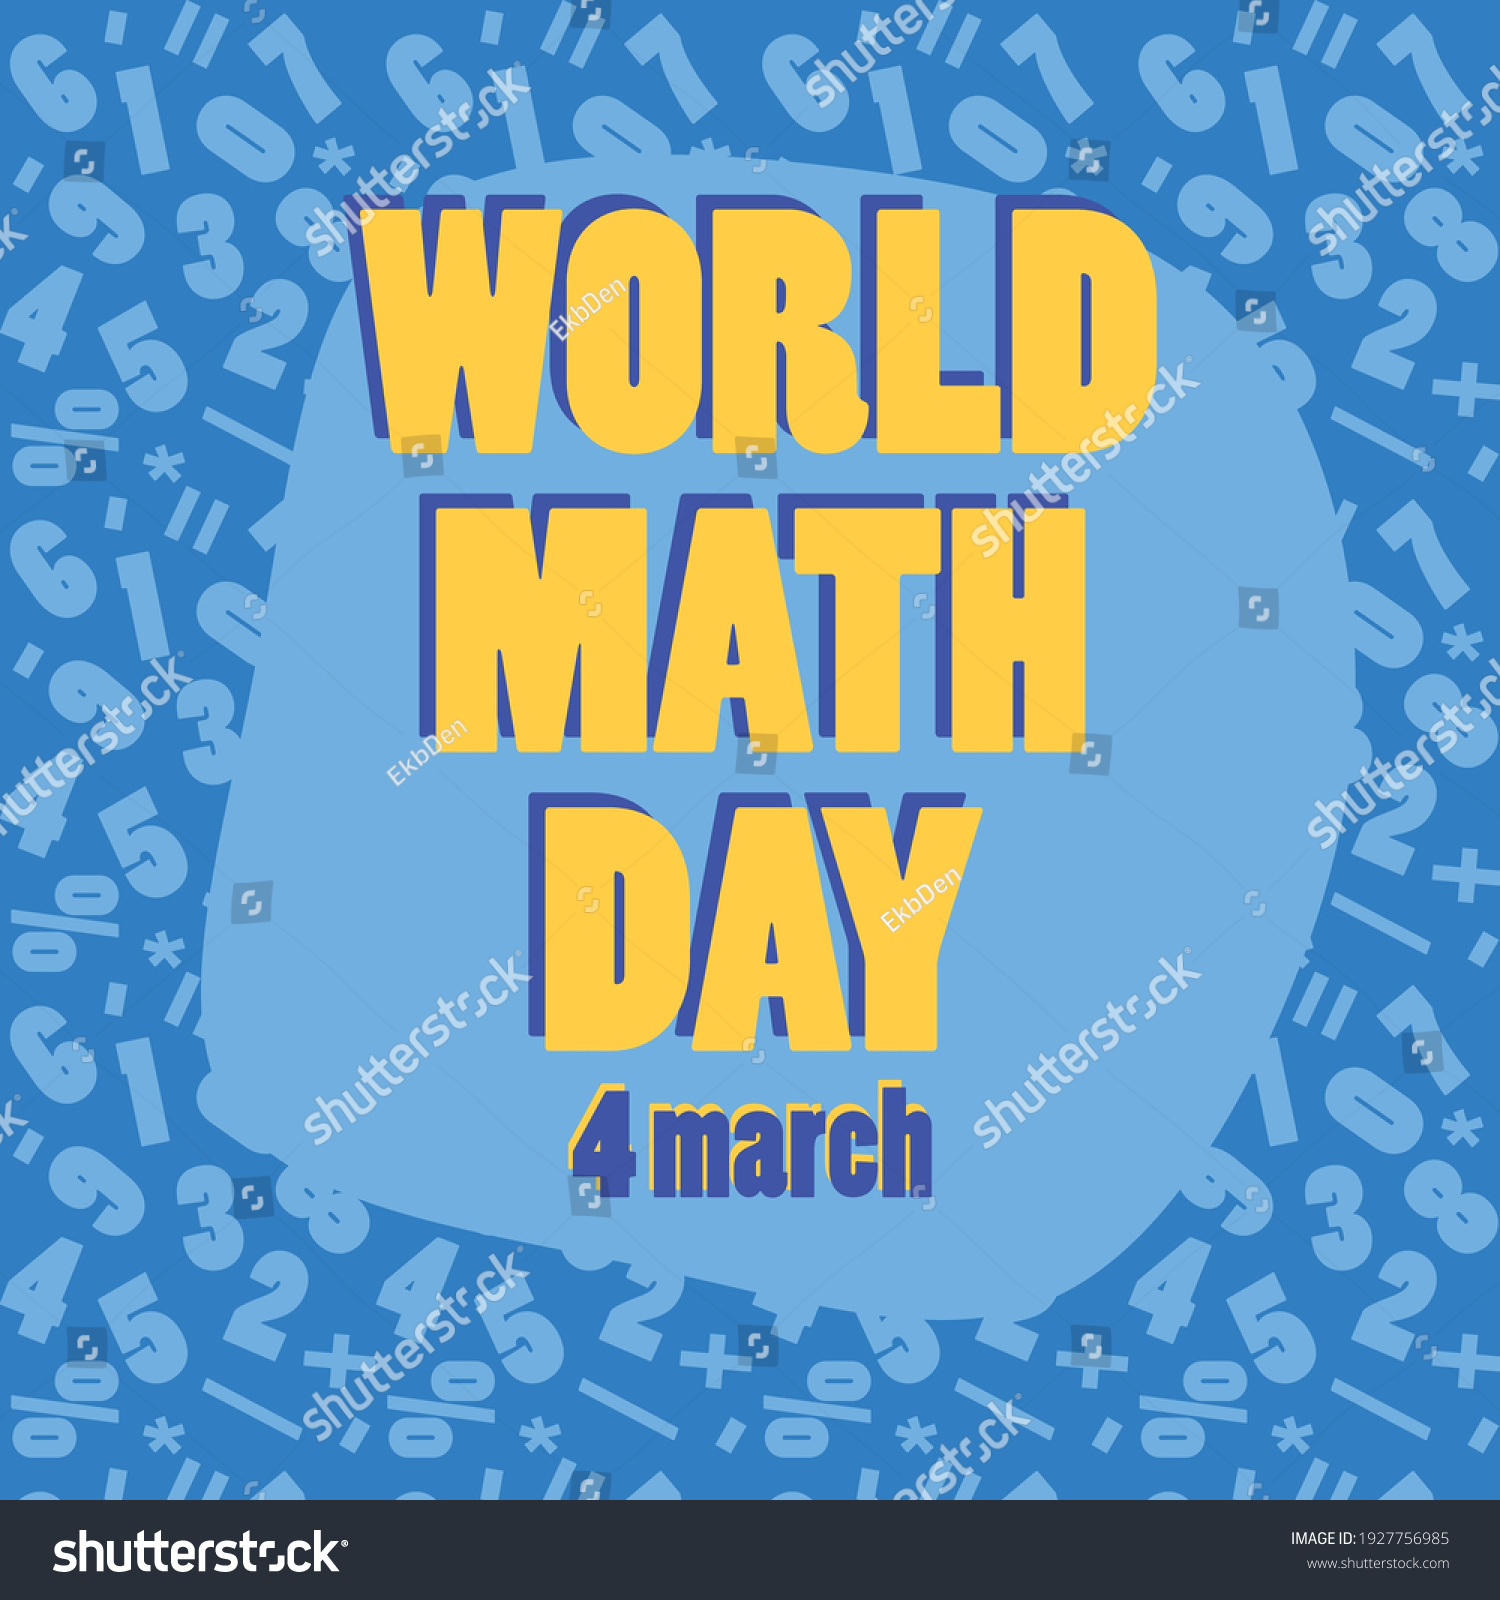 World Math Day Card Poster Stock Vector (Royalty Free) 1927756985